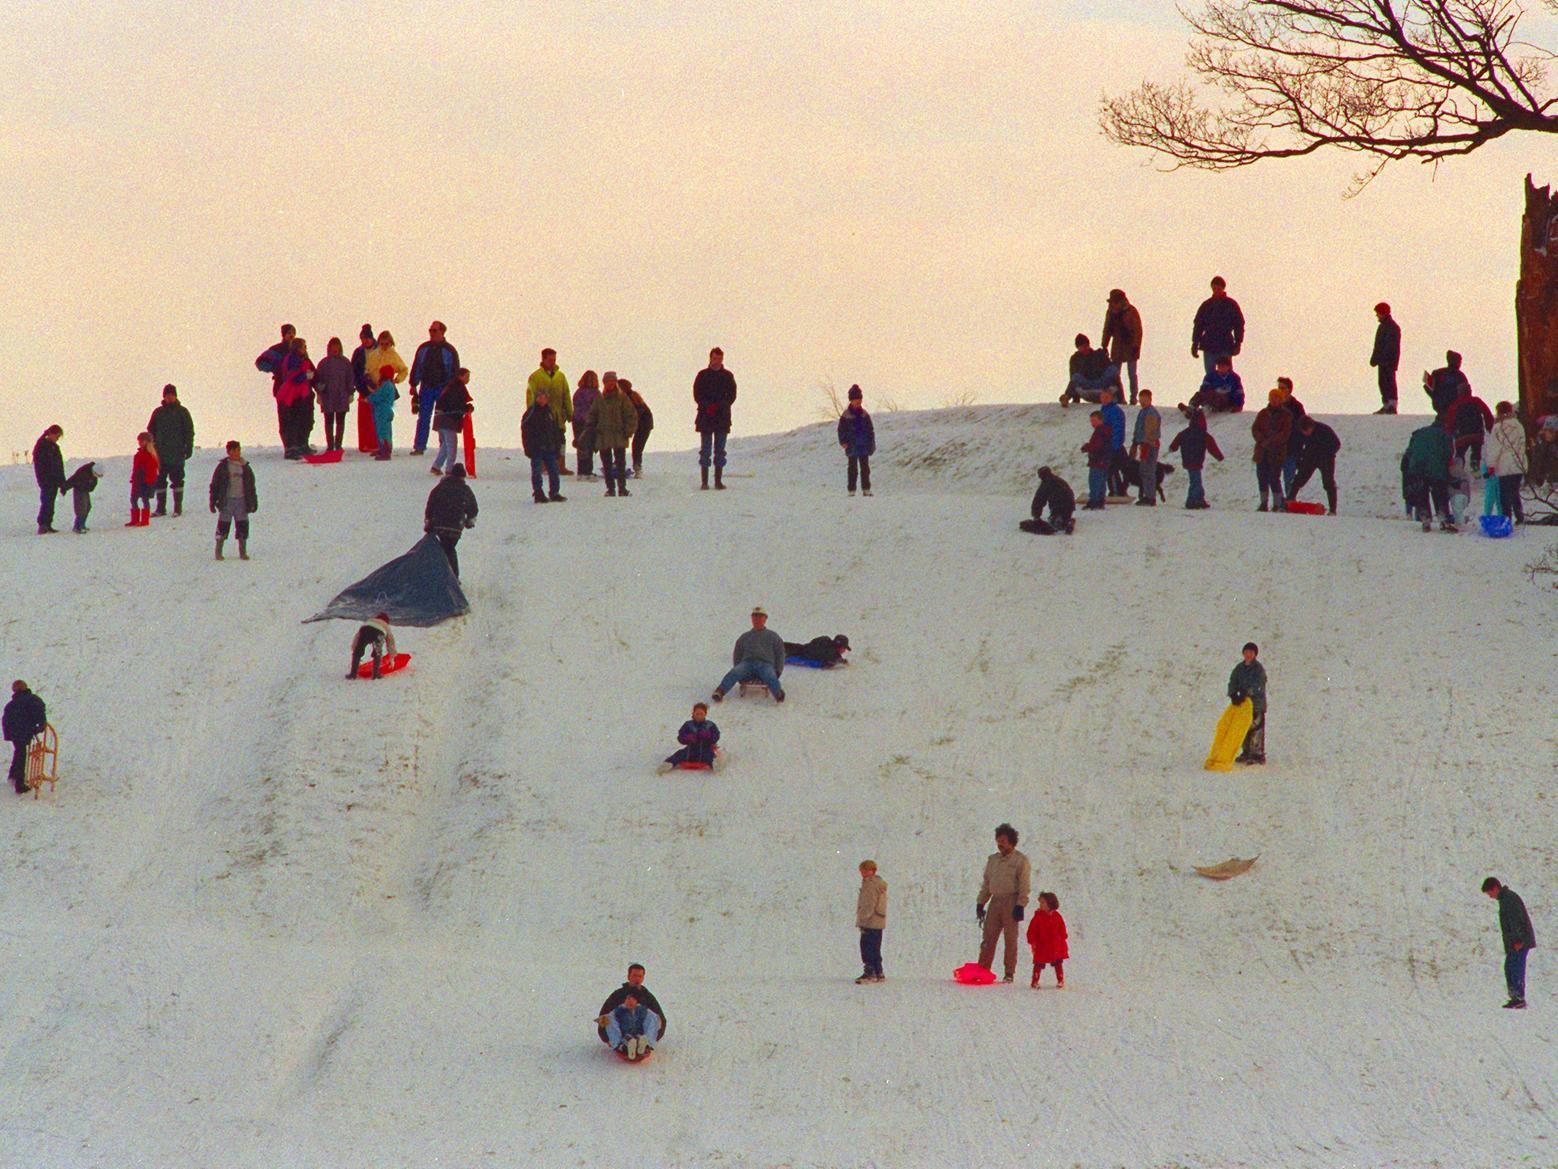 These people were making the most of arctic conditions in Leeds, enjoying sledging on a hillside off Wetherby Road.